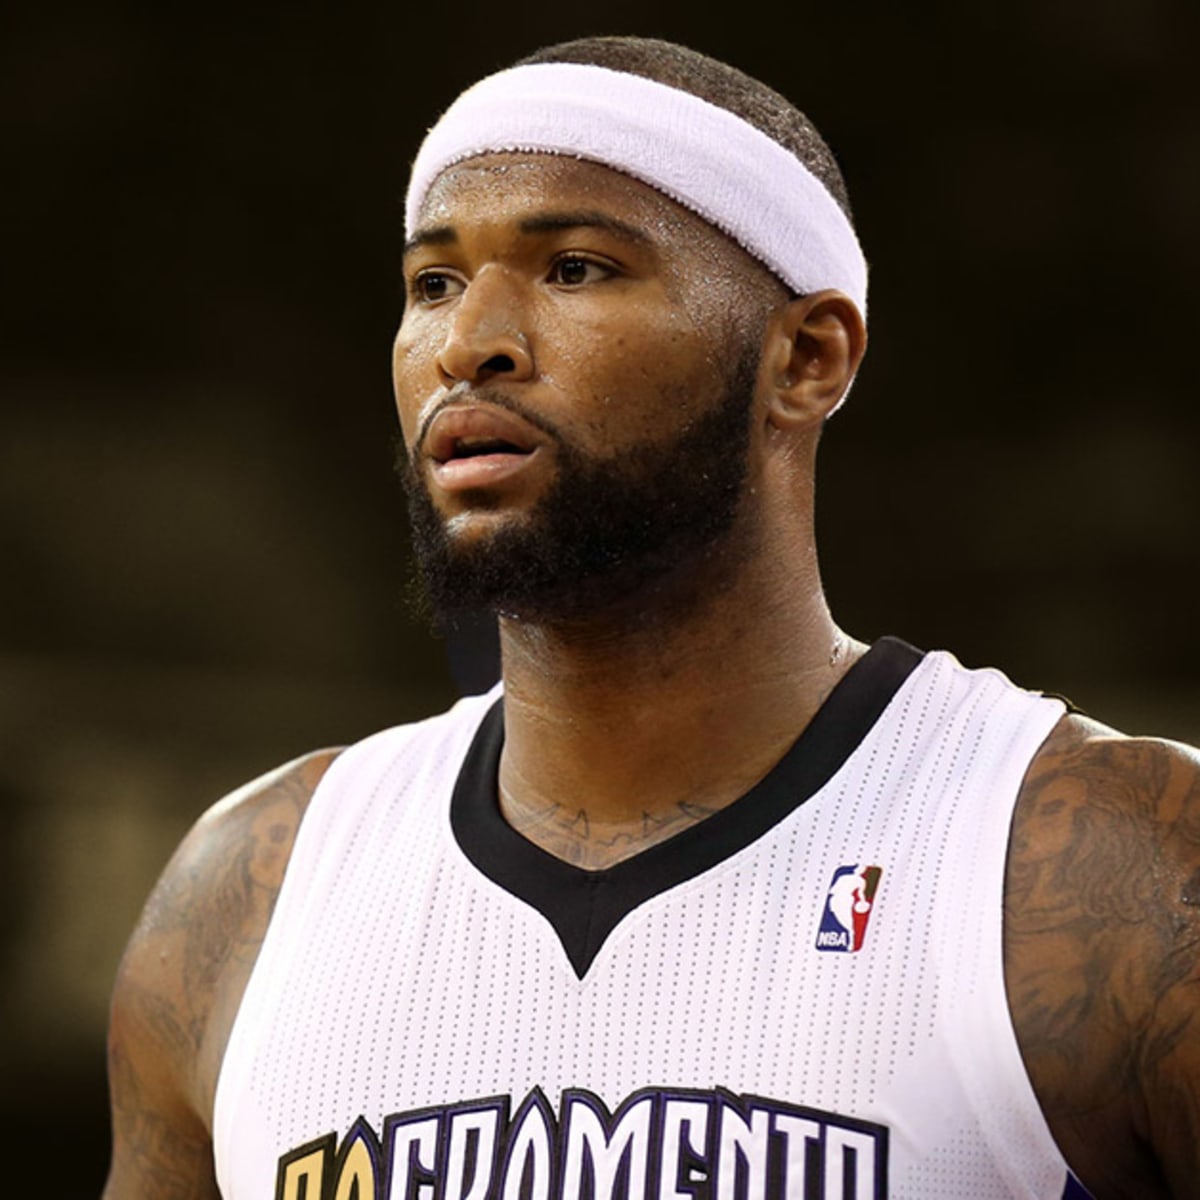 Look back at reunited teammates John Wall, DeMarcus Cousins in college